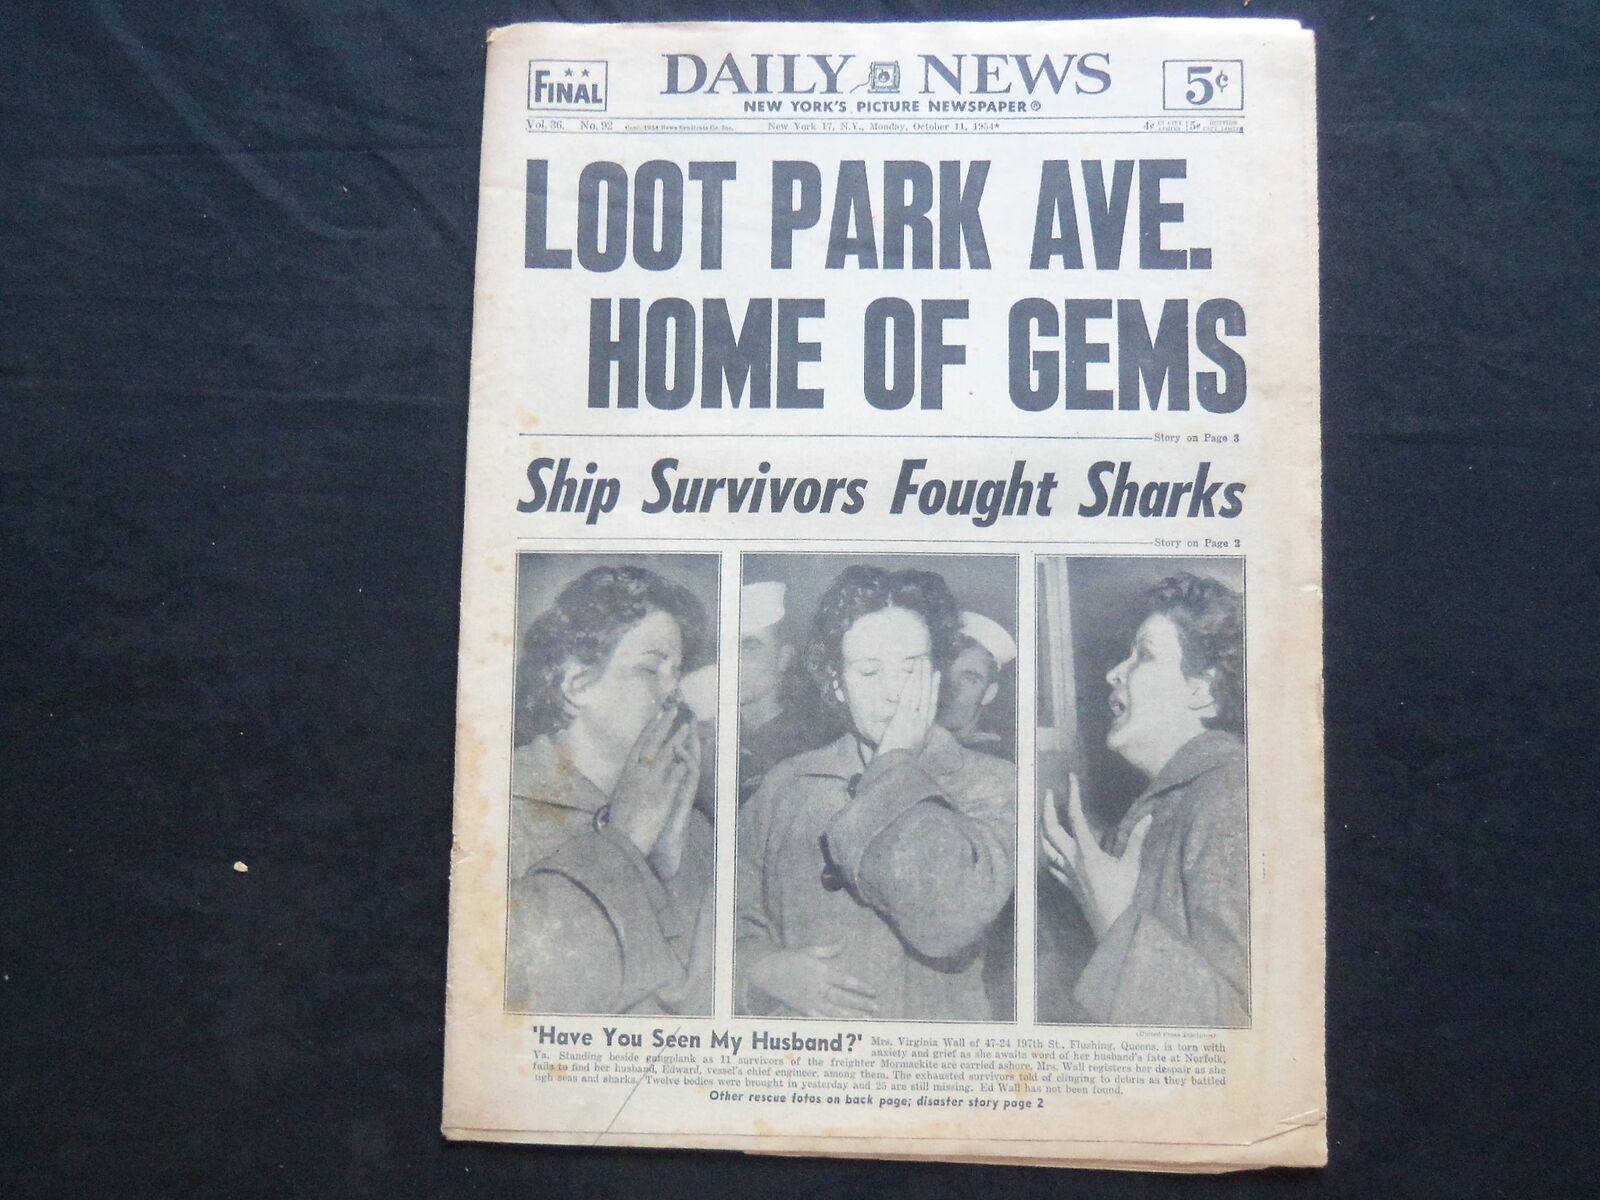 1954 OCTOBER 11 NY DAILY NEWS NEWSPAPER - LOOT PARK AVE HOME OF GEMS - NP 2504